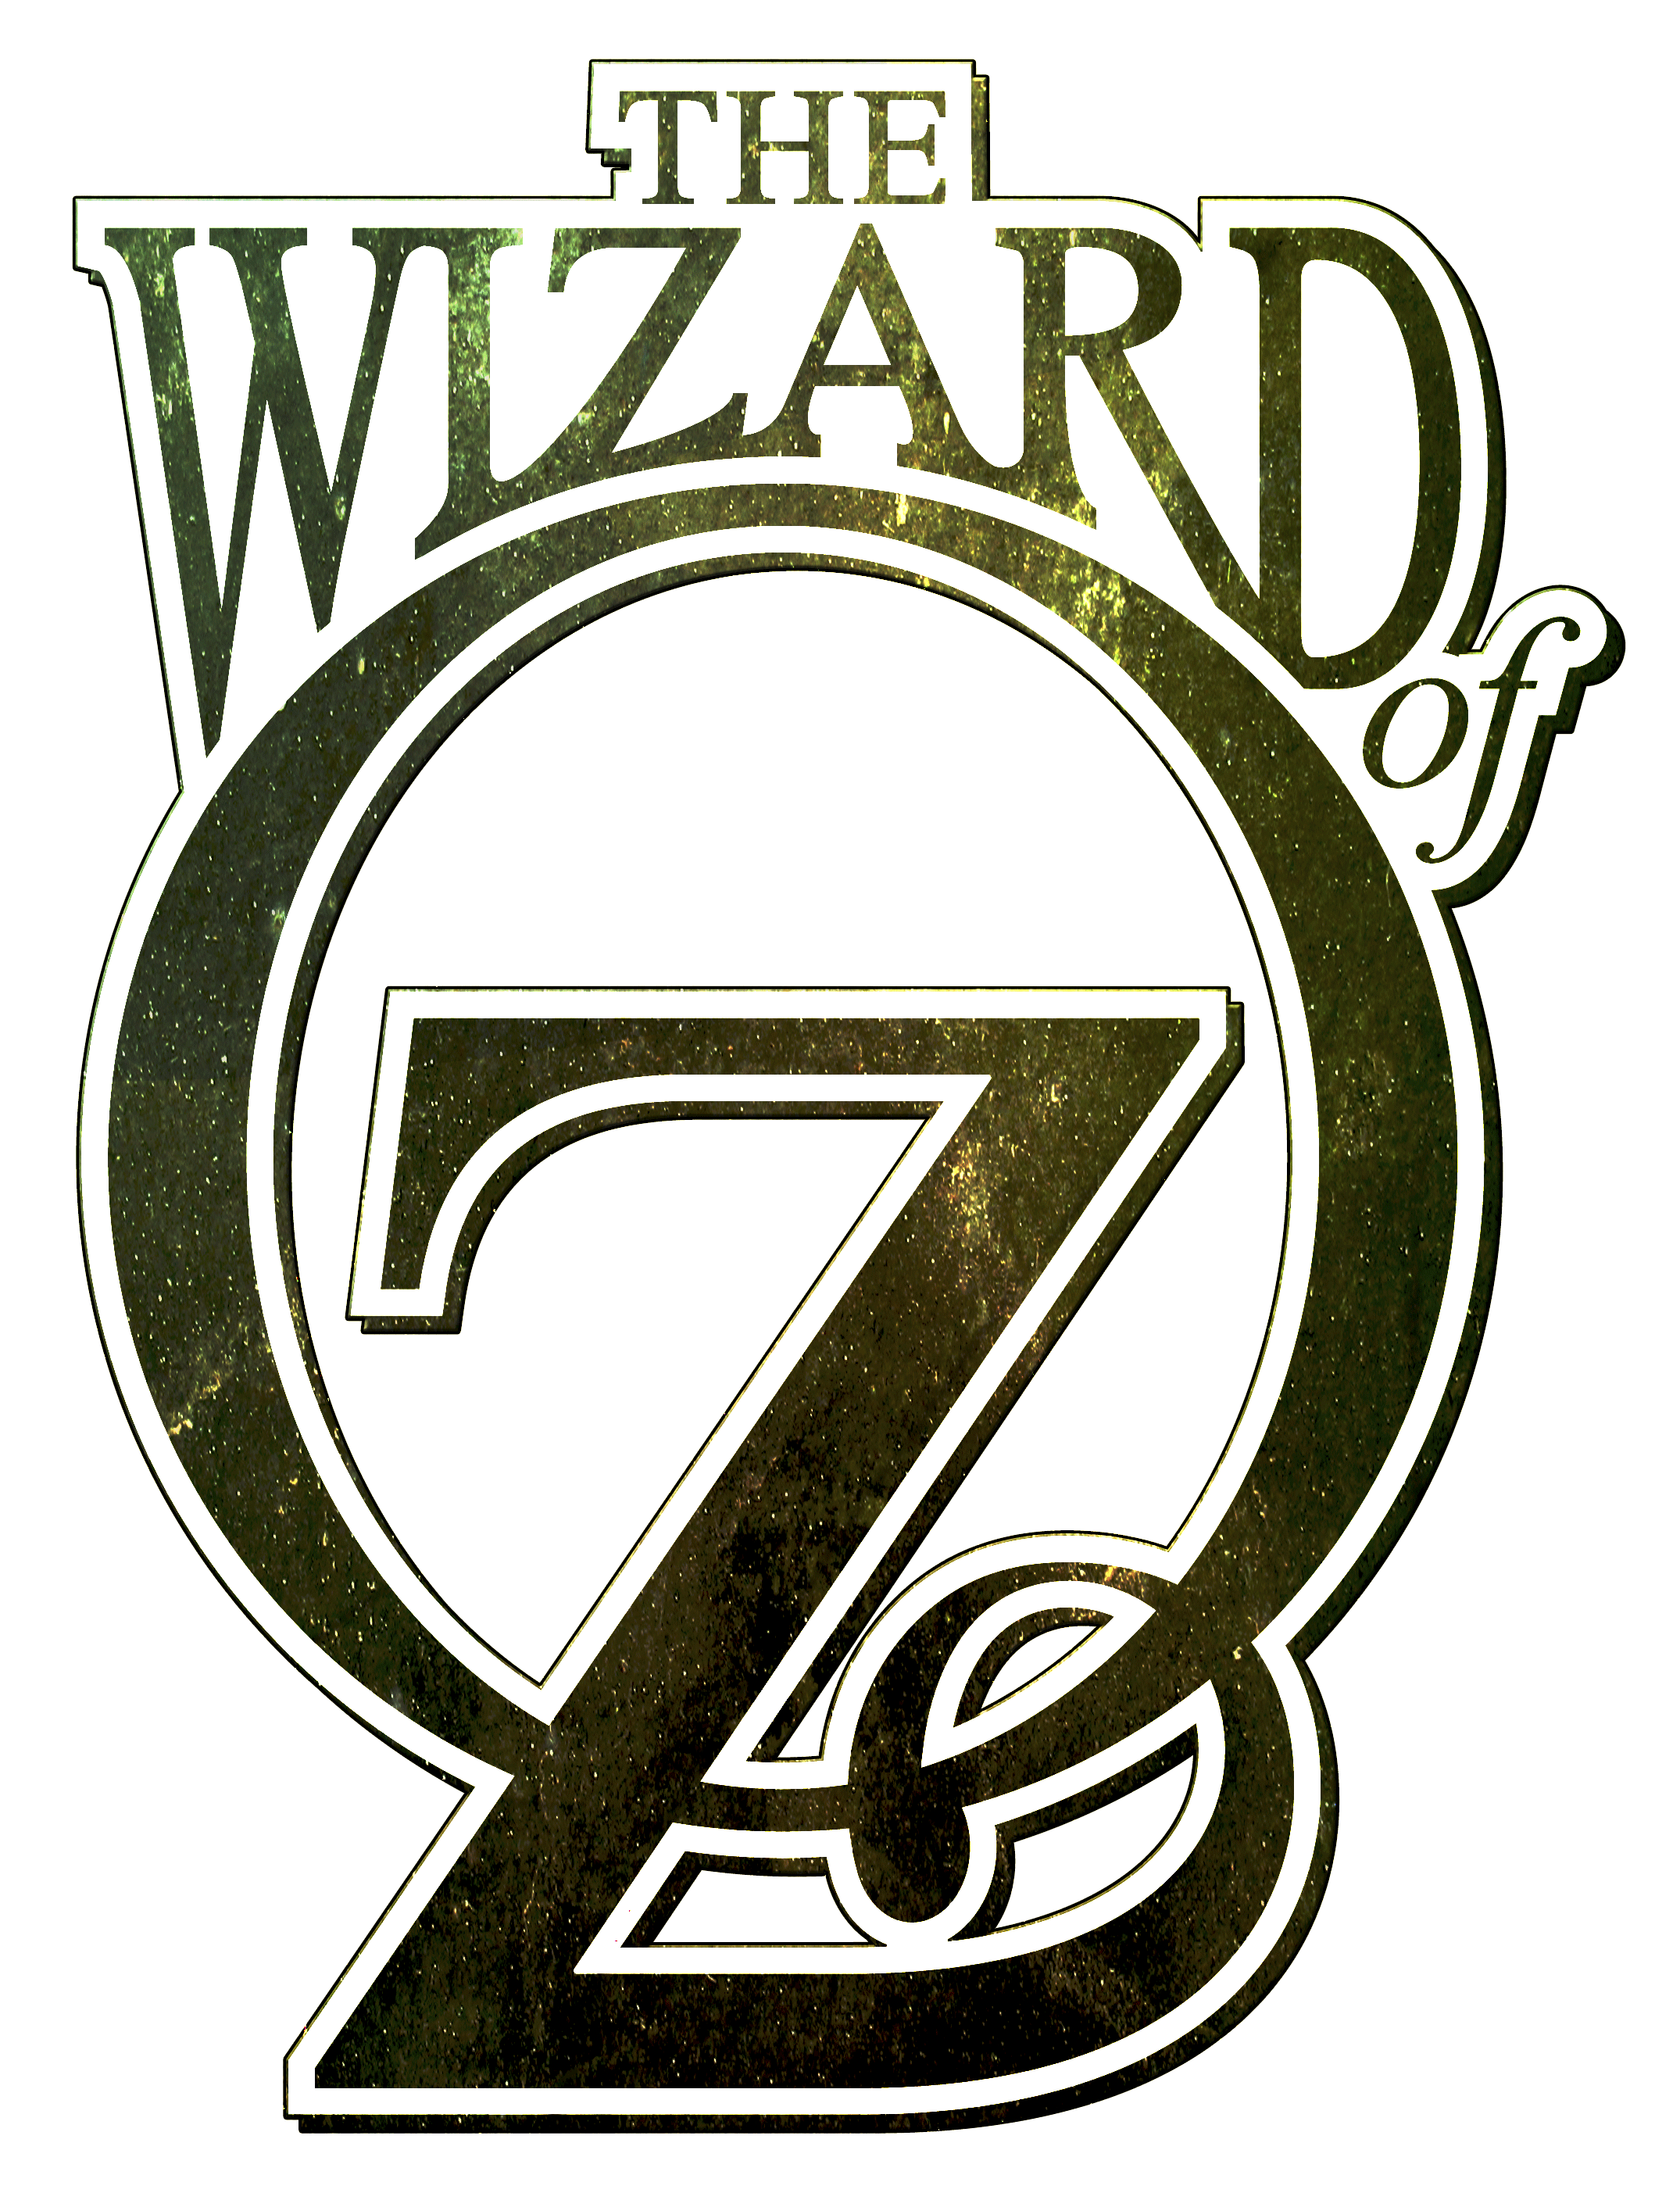 Oz Logo - Image result for wizard of Oz logos | wizard of oz in 2019 | Wizard ...